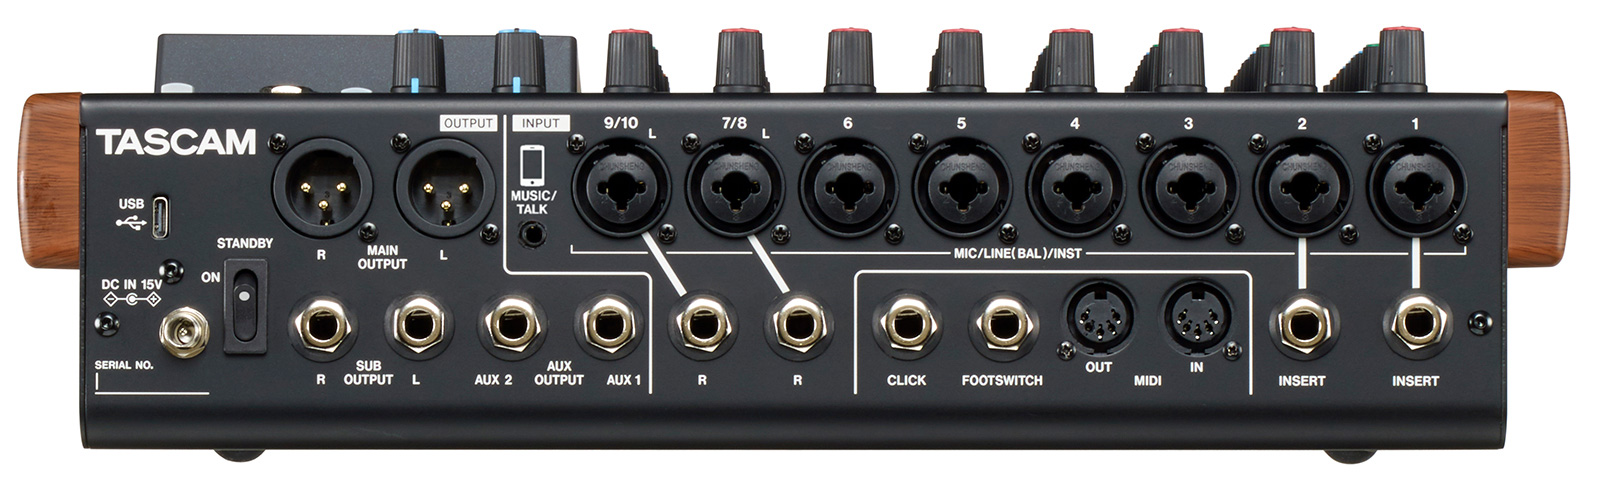 Compact, Rugged, and Loaded with Inputs